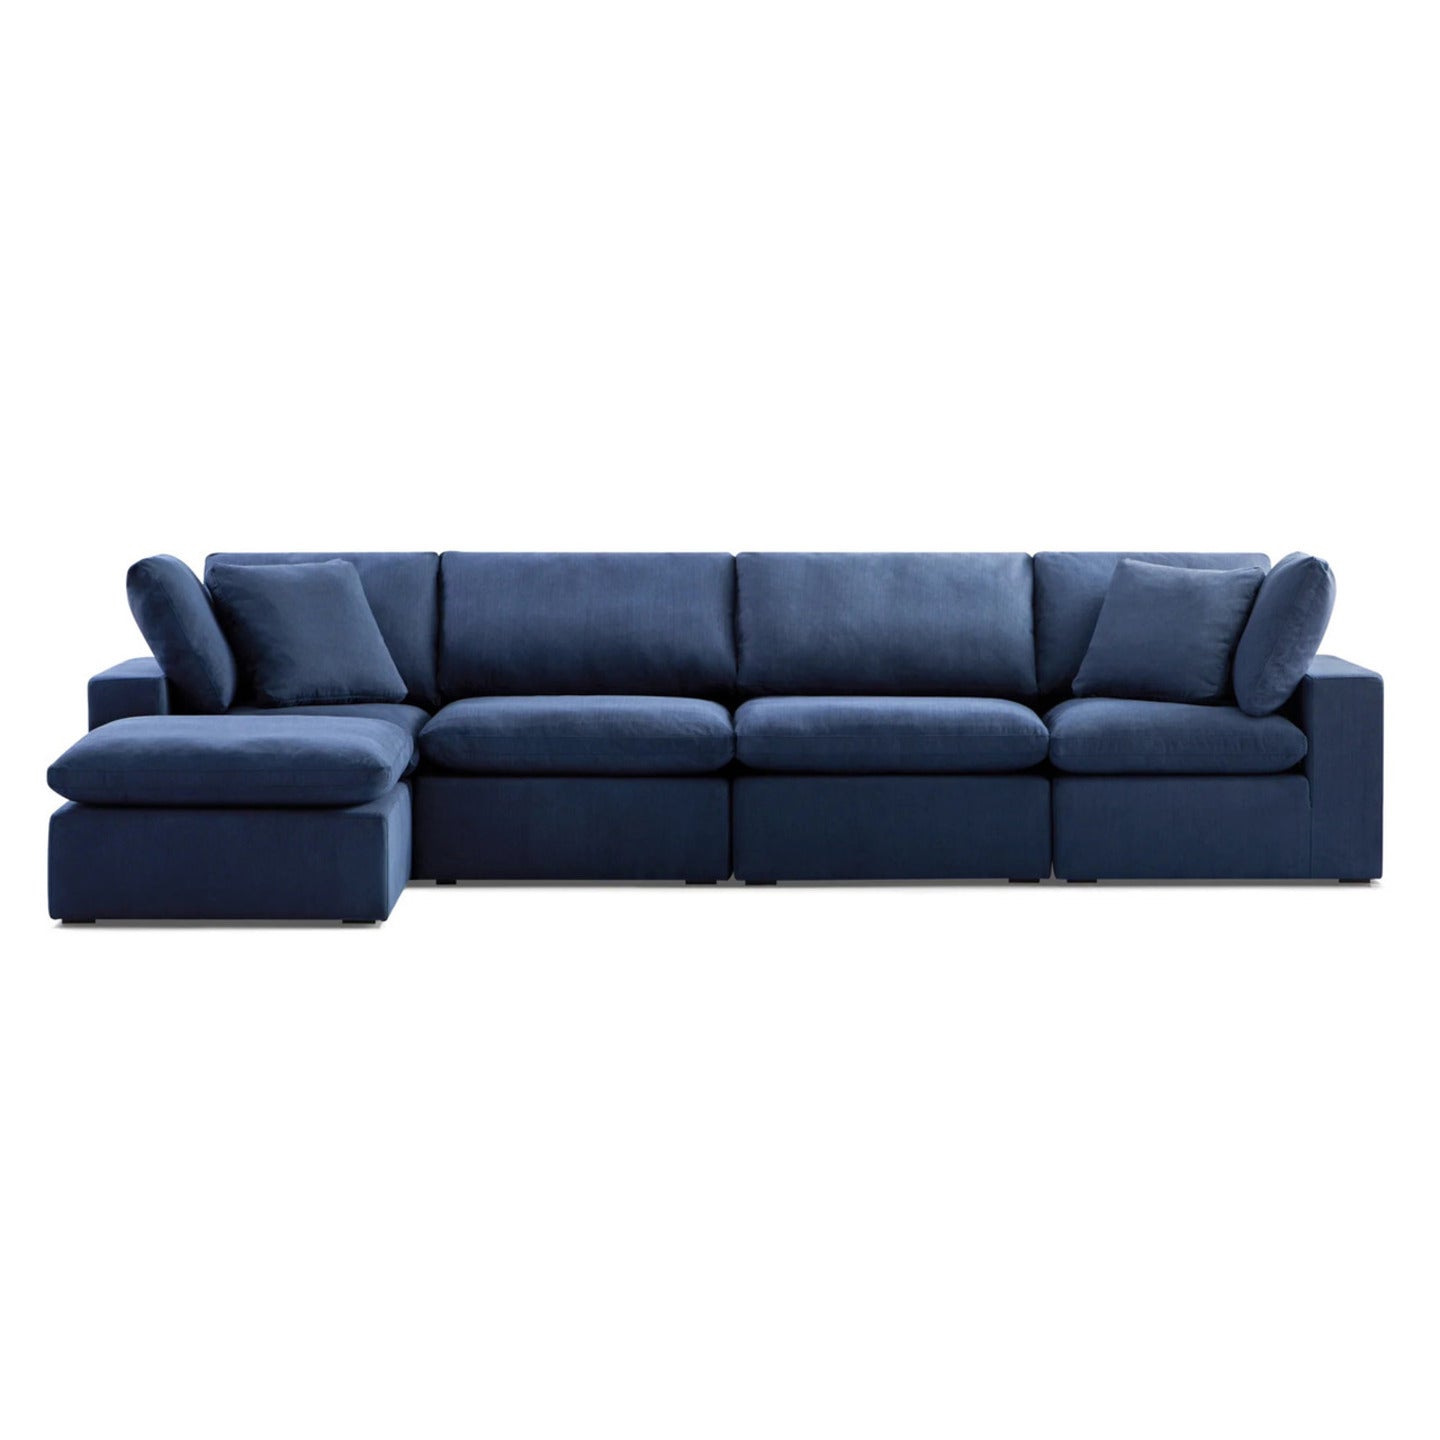 Haven 4 Seater Sectional Sofa With Ottoman, Navy Blue